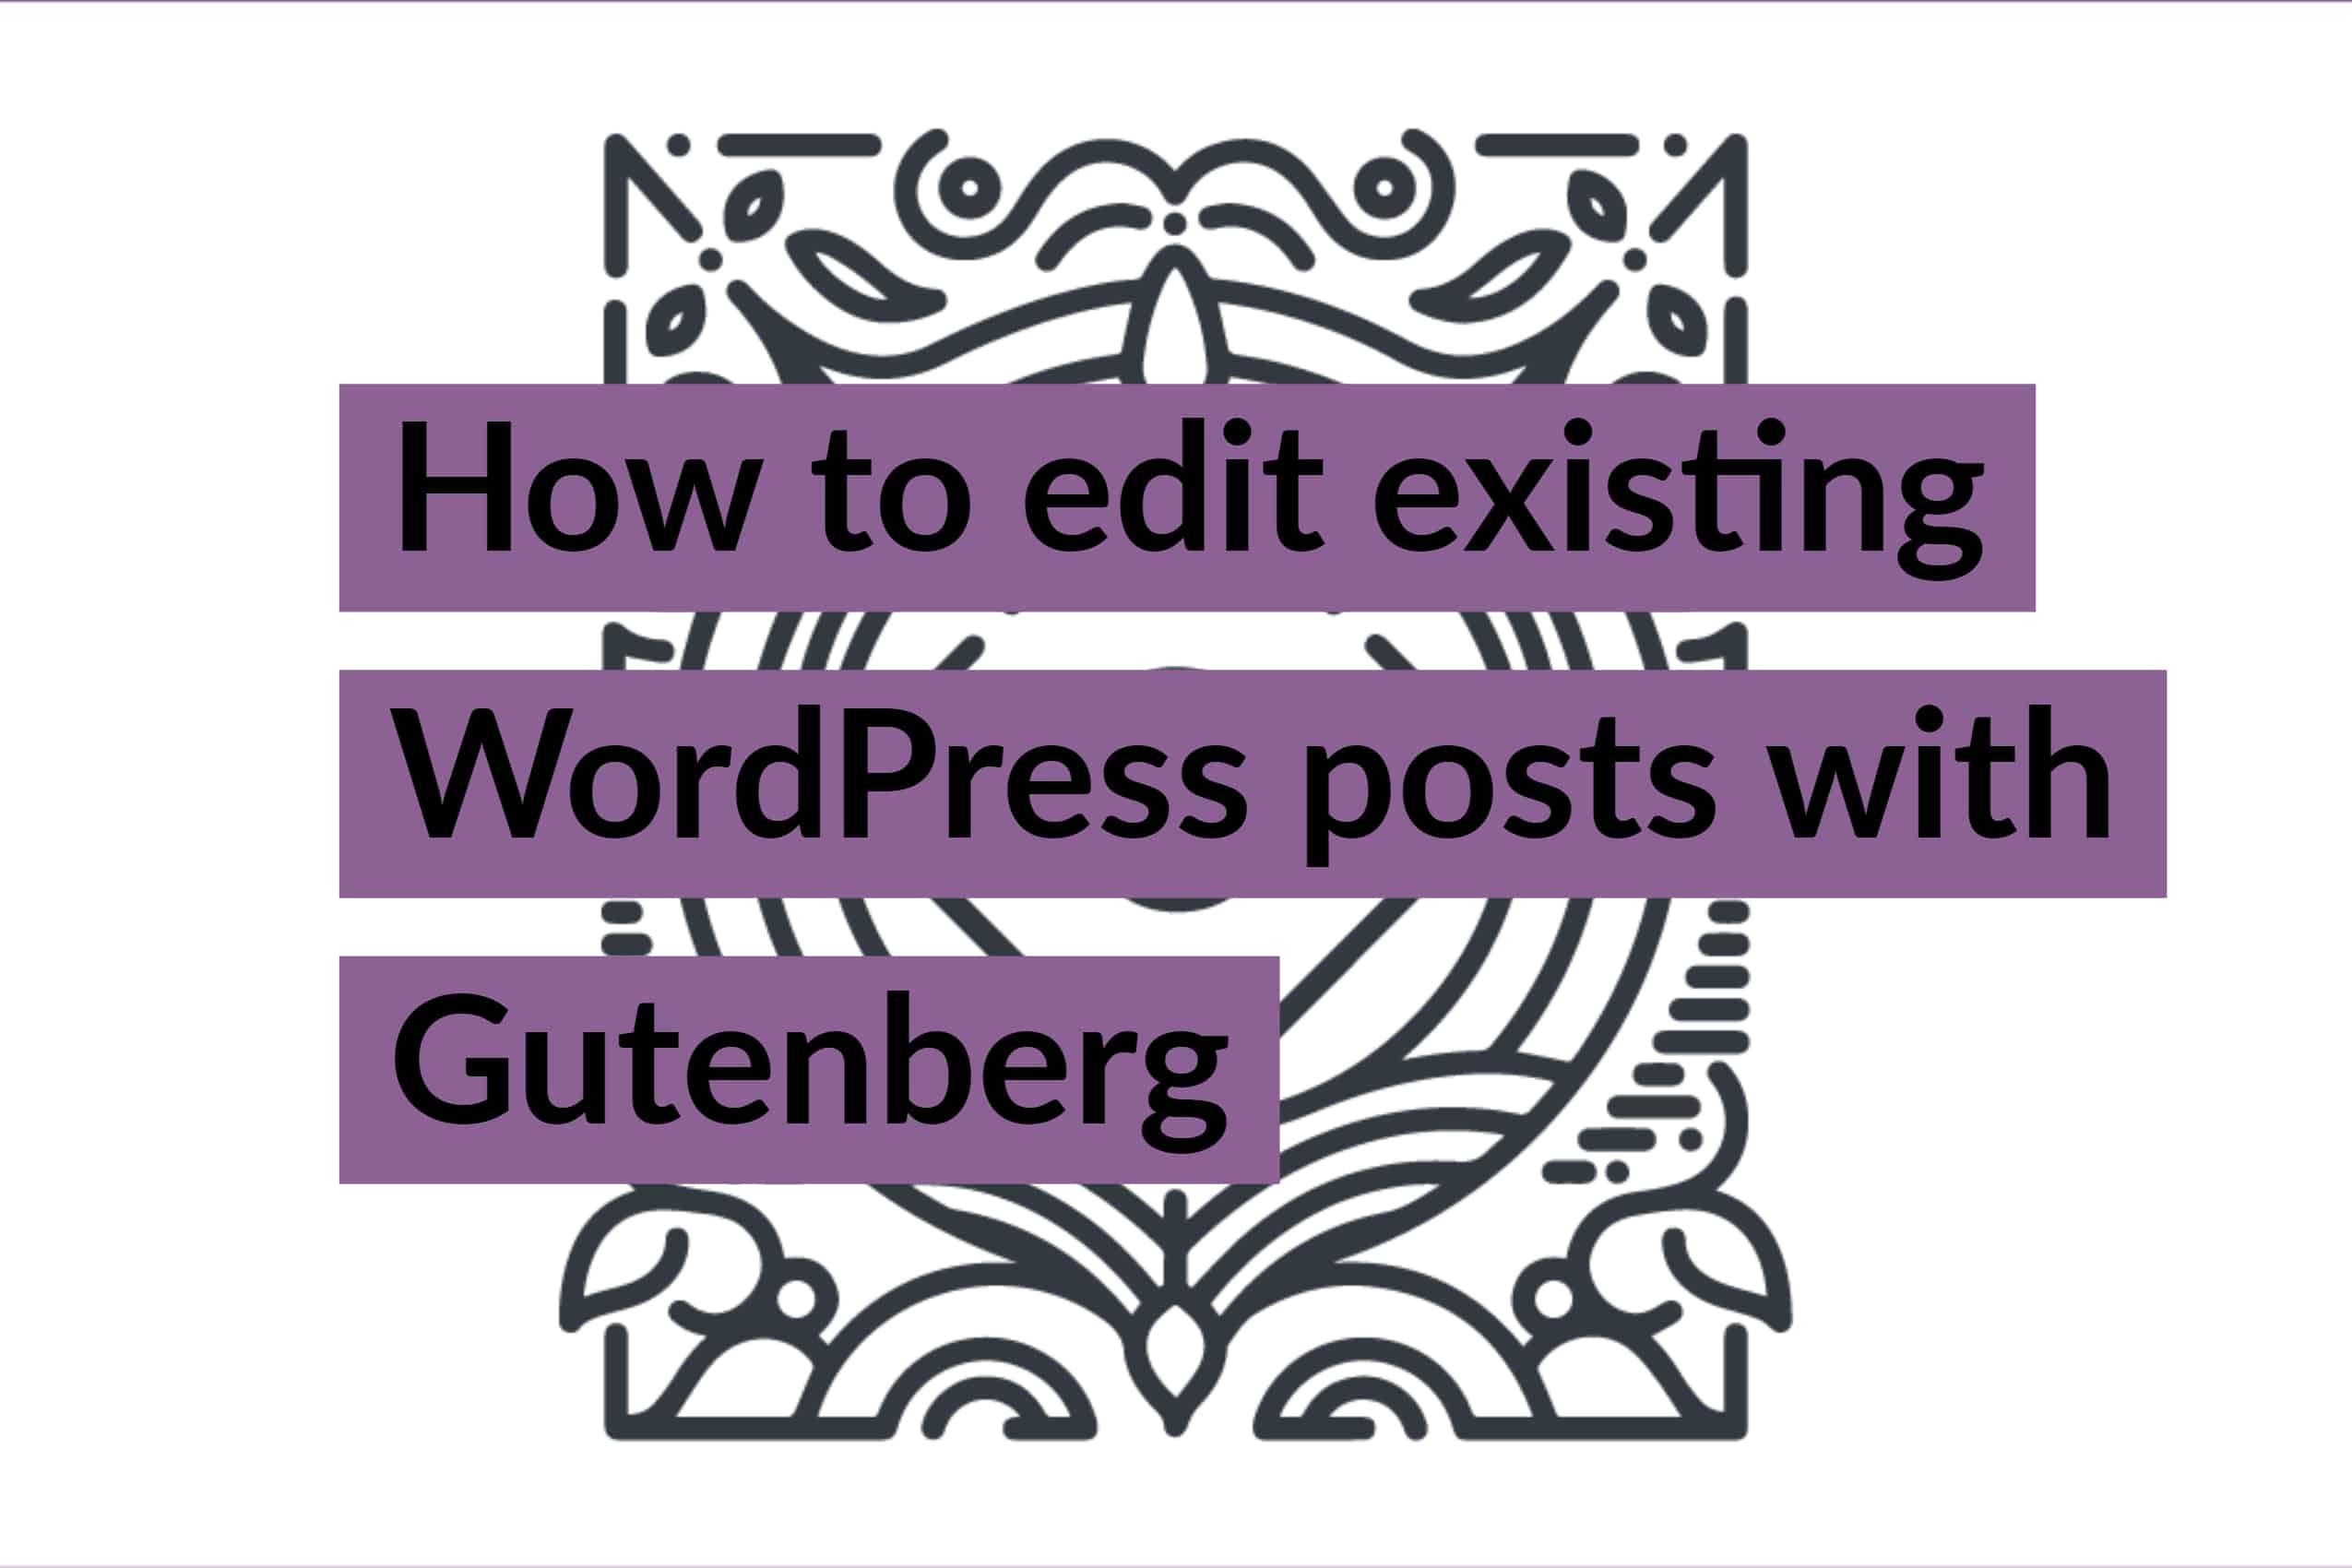 How to edit existing WordPress posts with Gutenberg